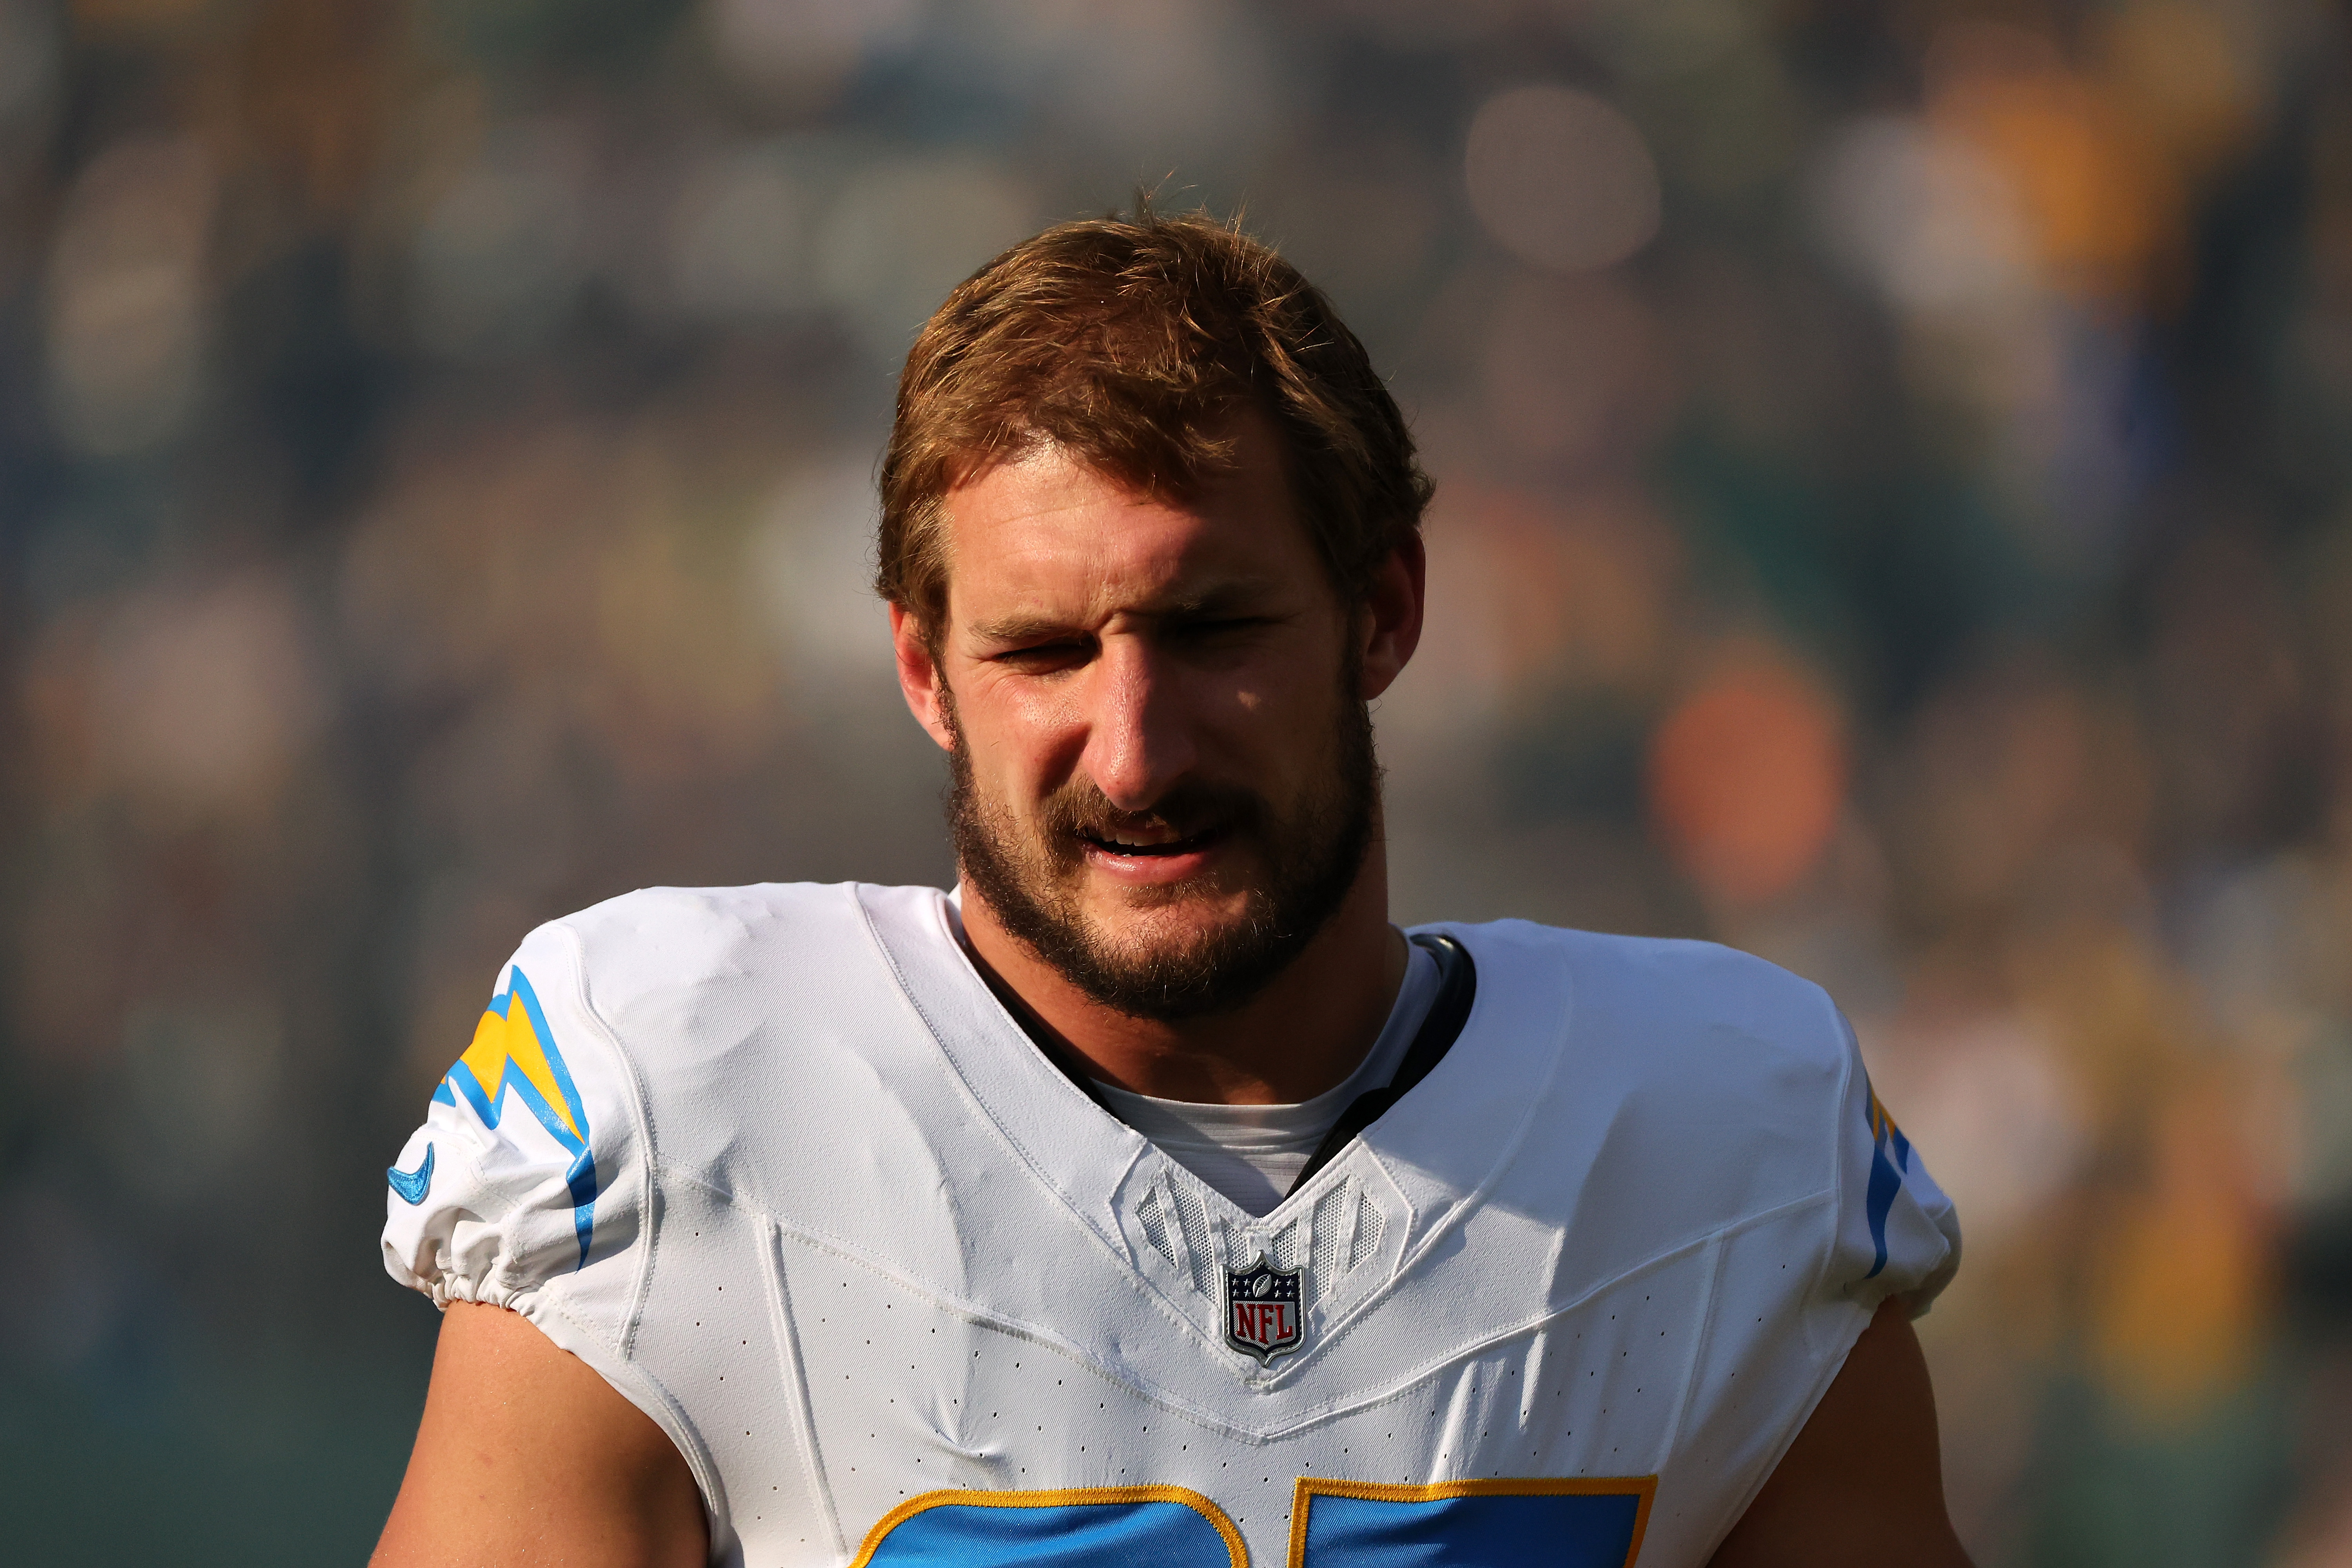 Los Angeles Chargers v Green Bay Packers